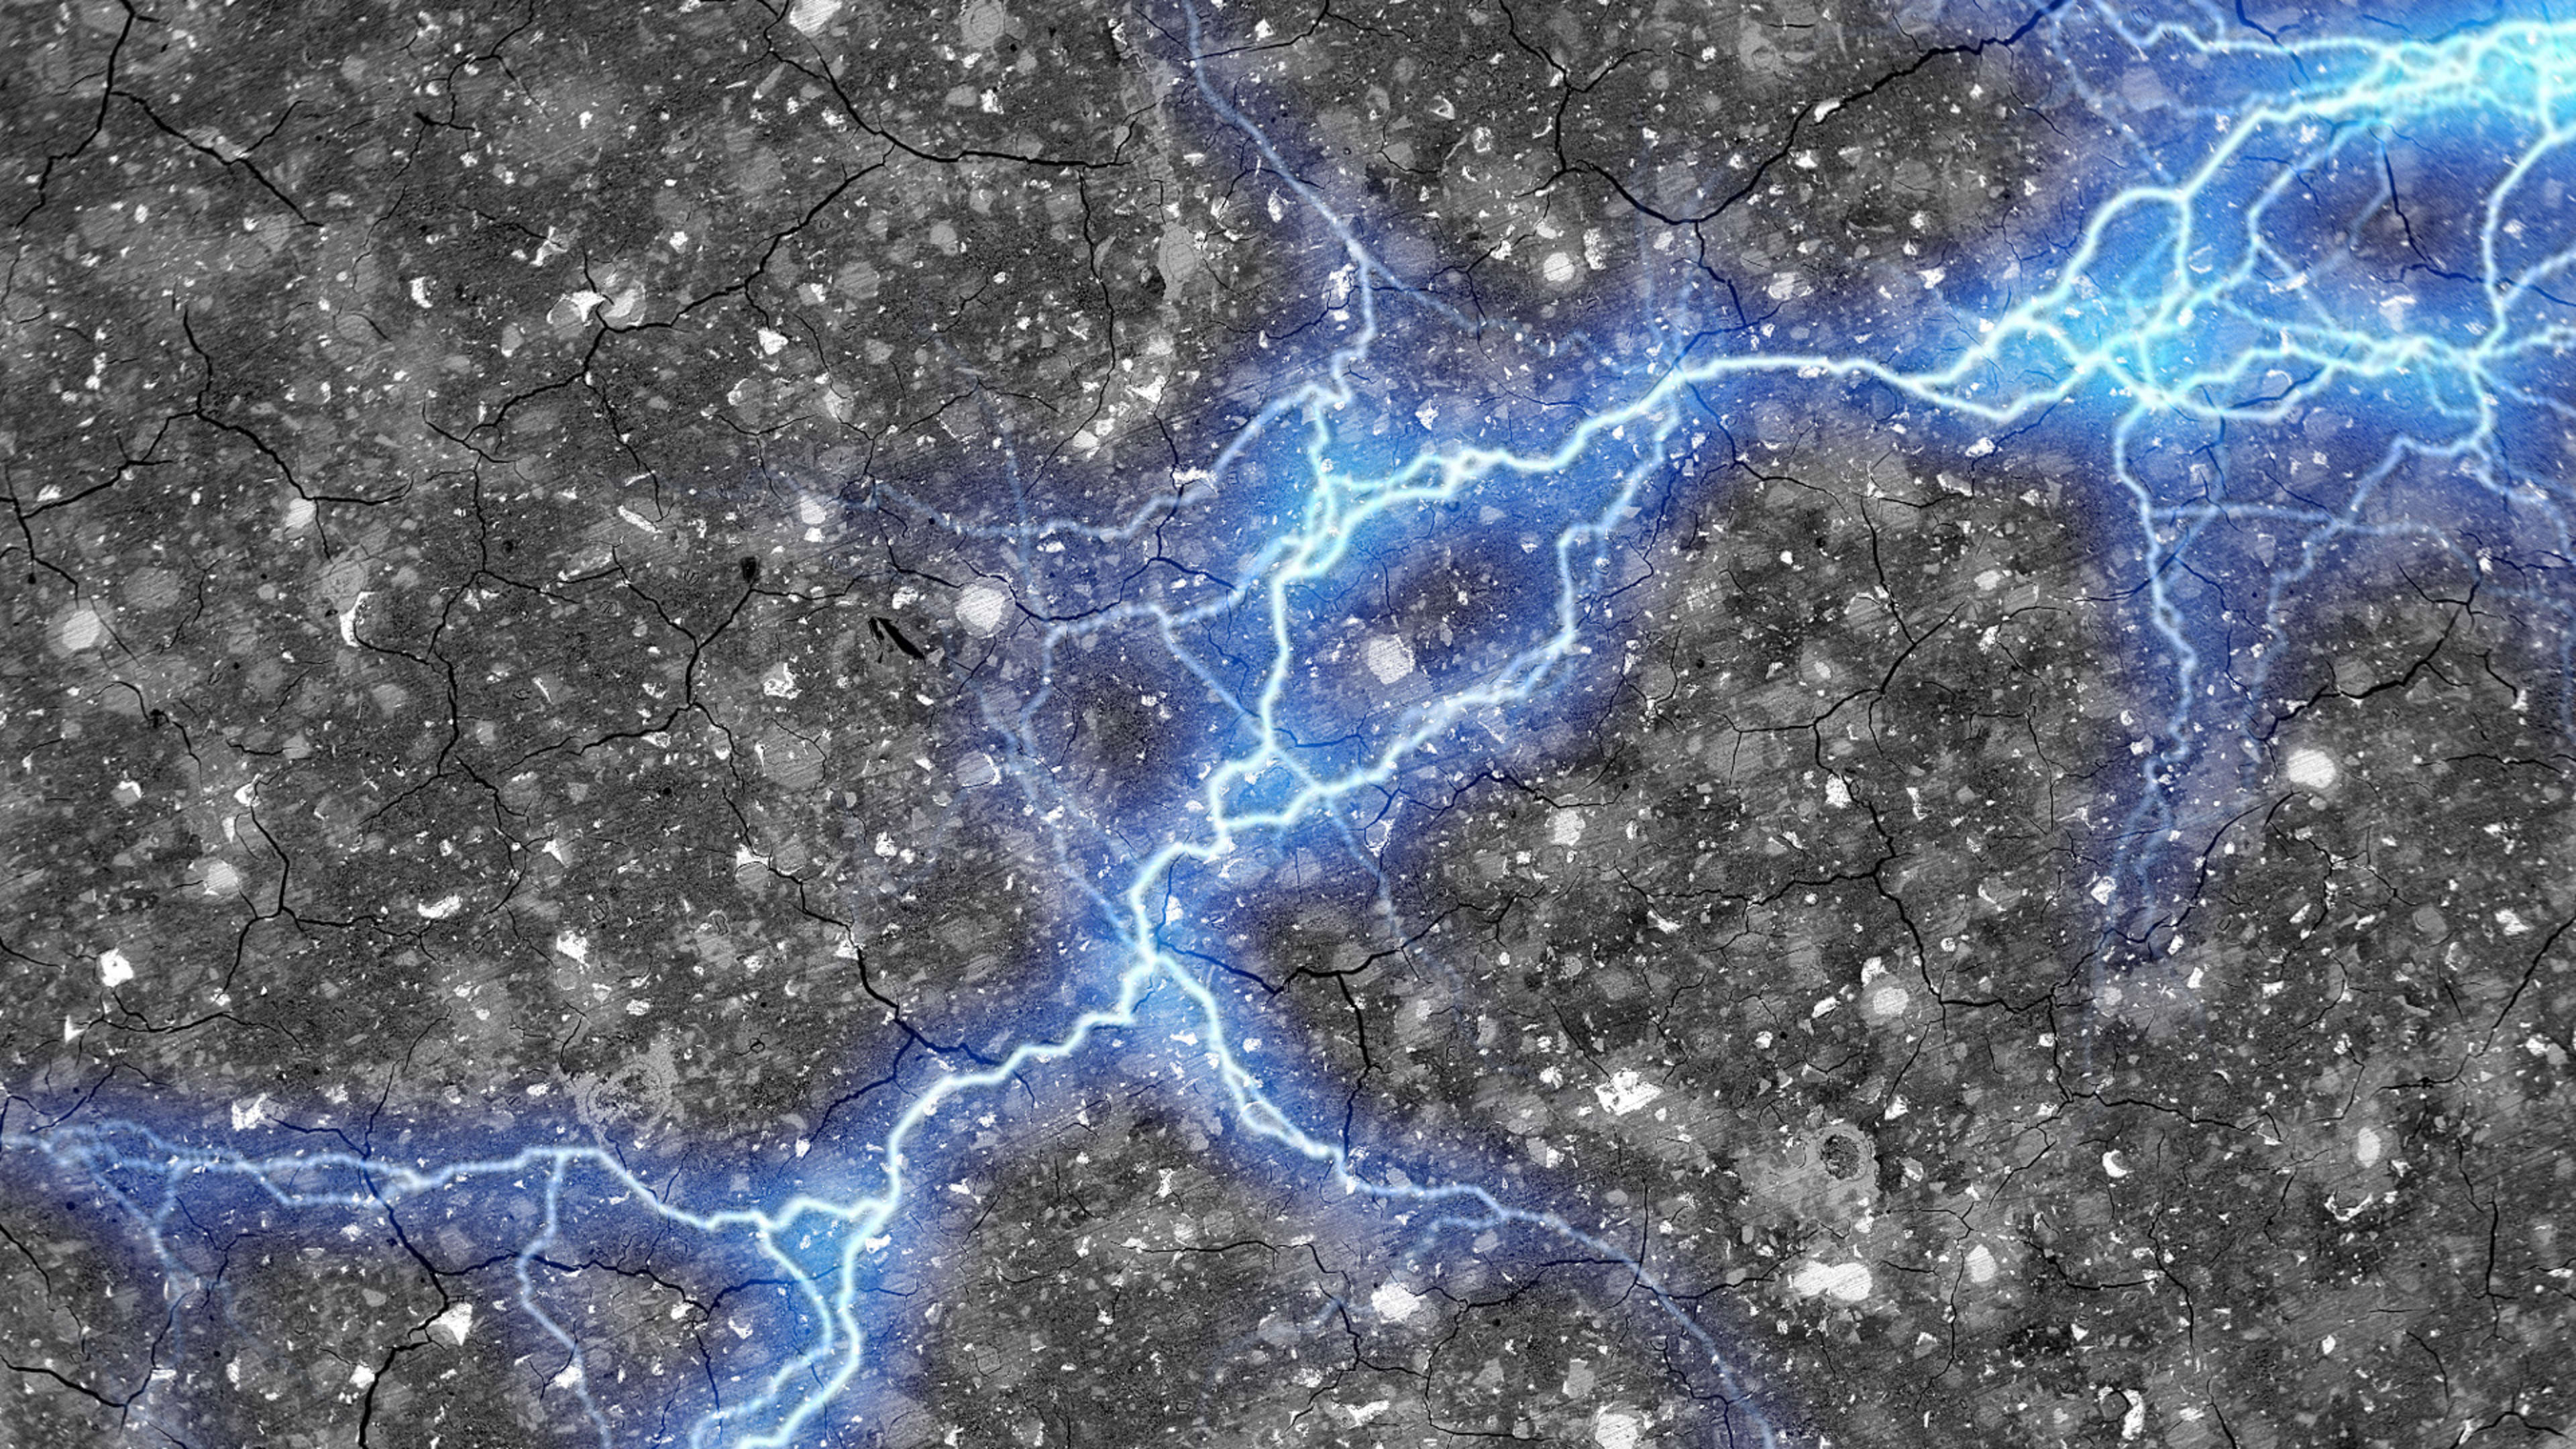 A streak of blue lightning, representing energy, spreads horizontally across a textured cement surface.